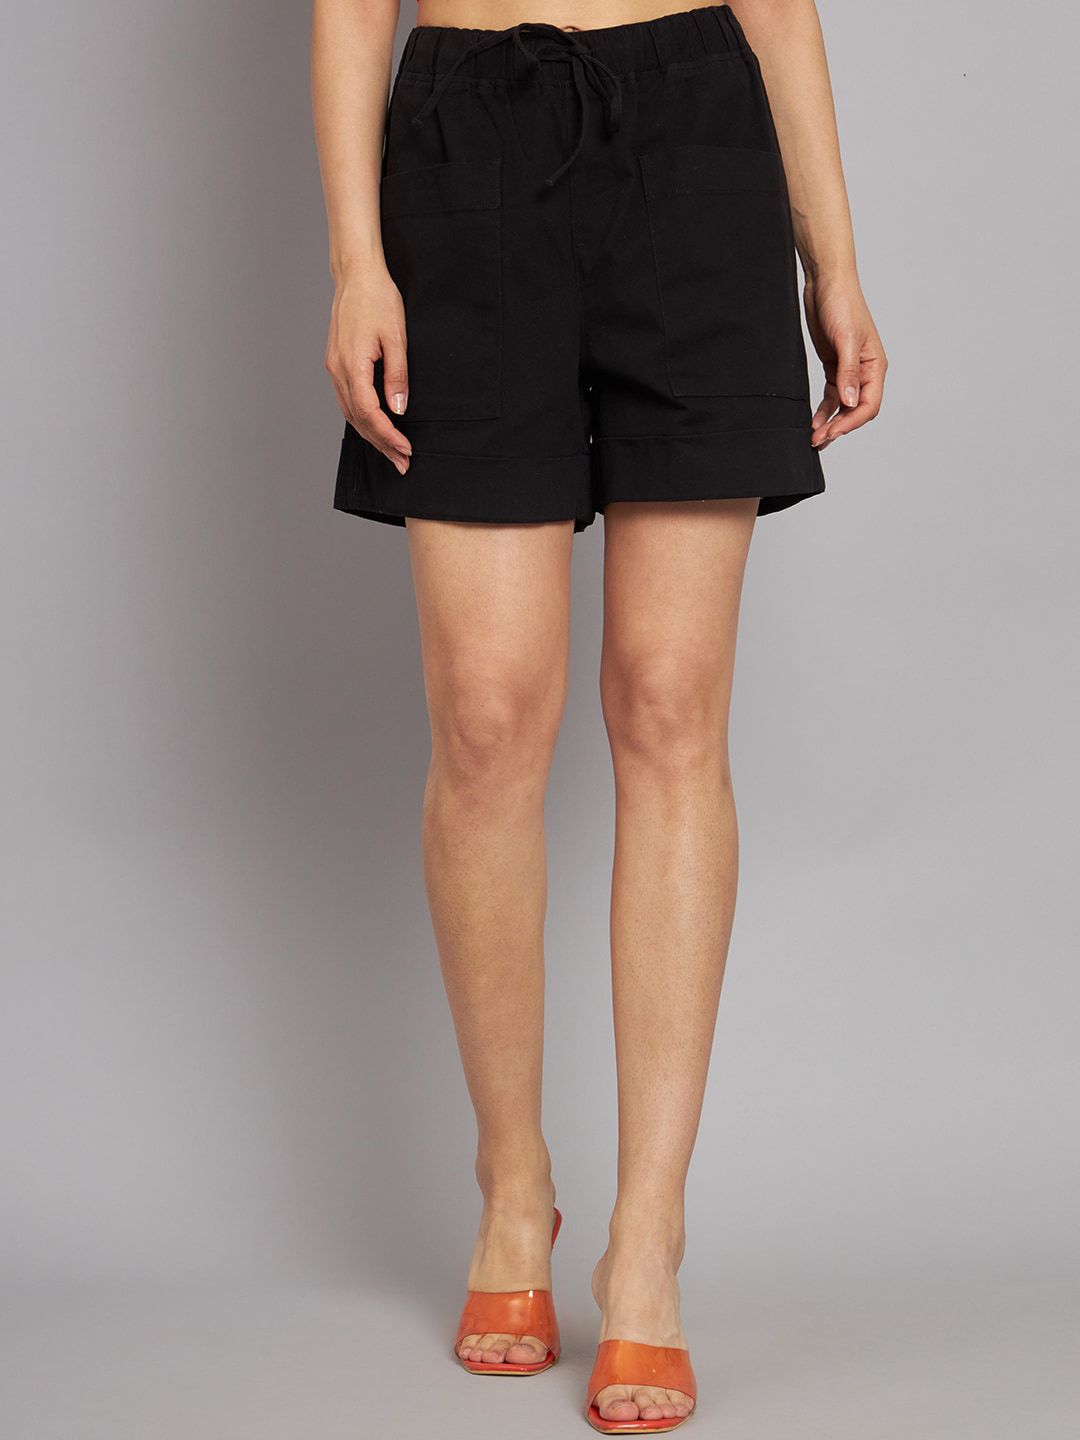 NoBarr Women Mid-Rise Cotton Shorts Price in India